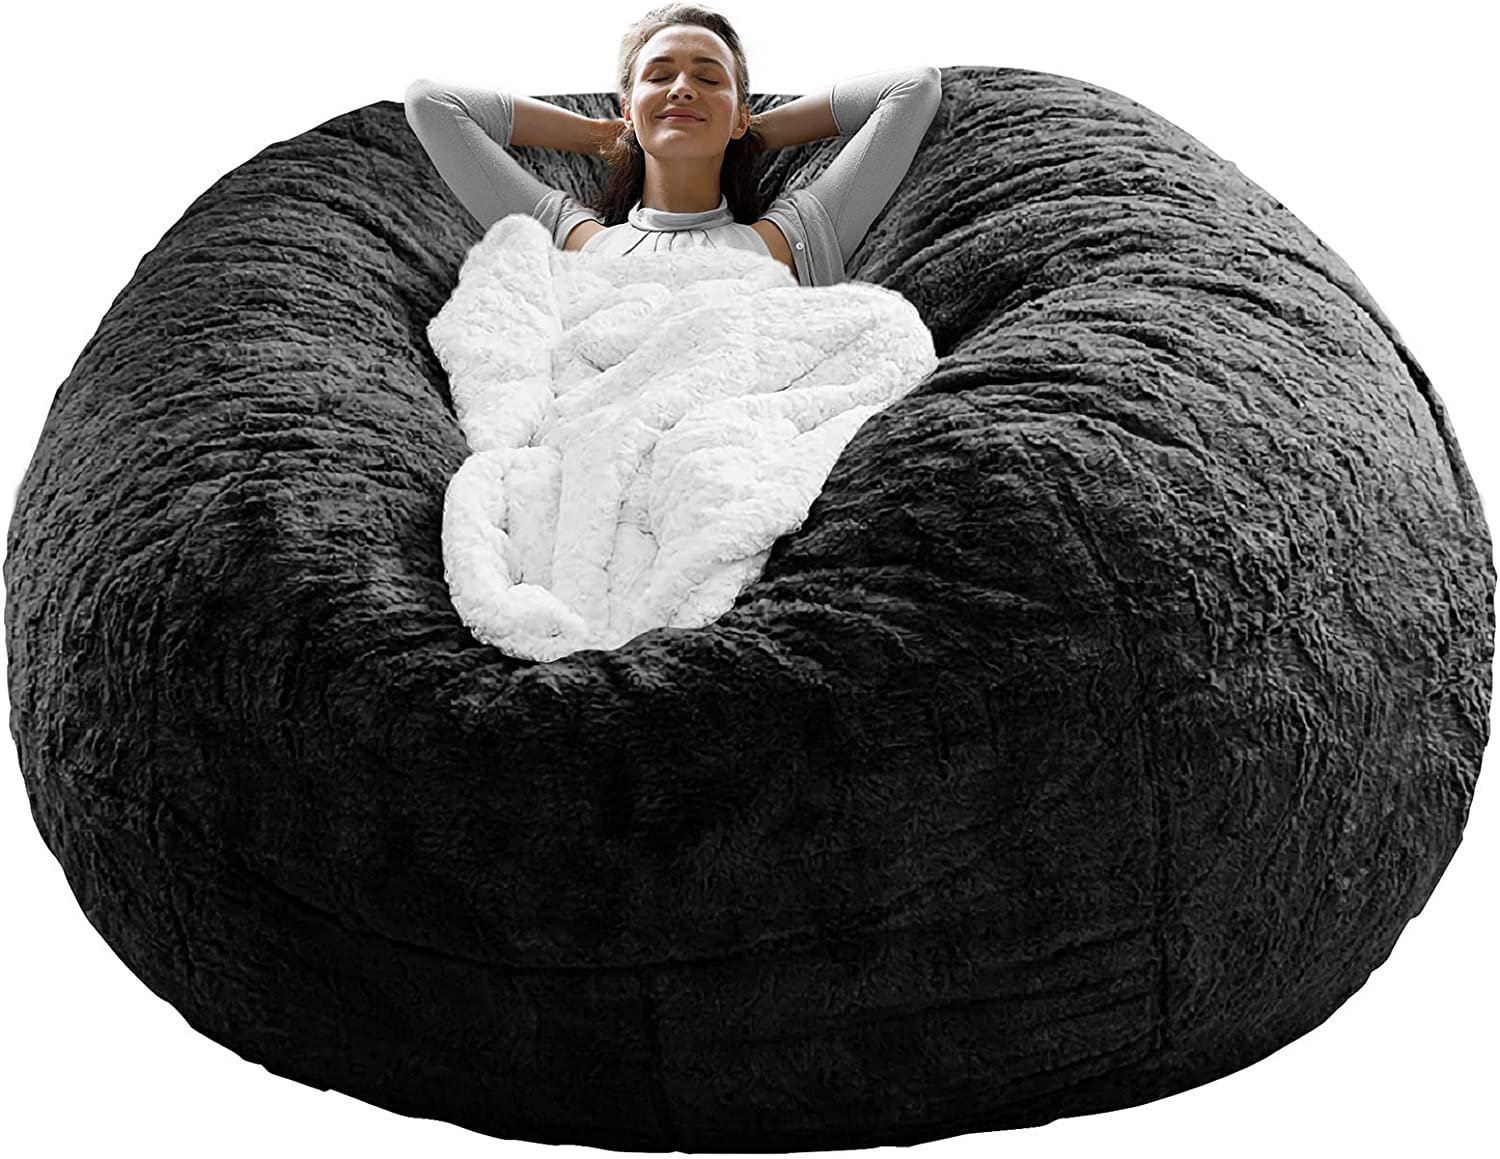 Chair Large Outdoor Friendly Bean Bag Cover